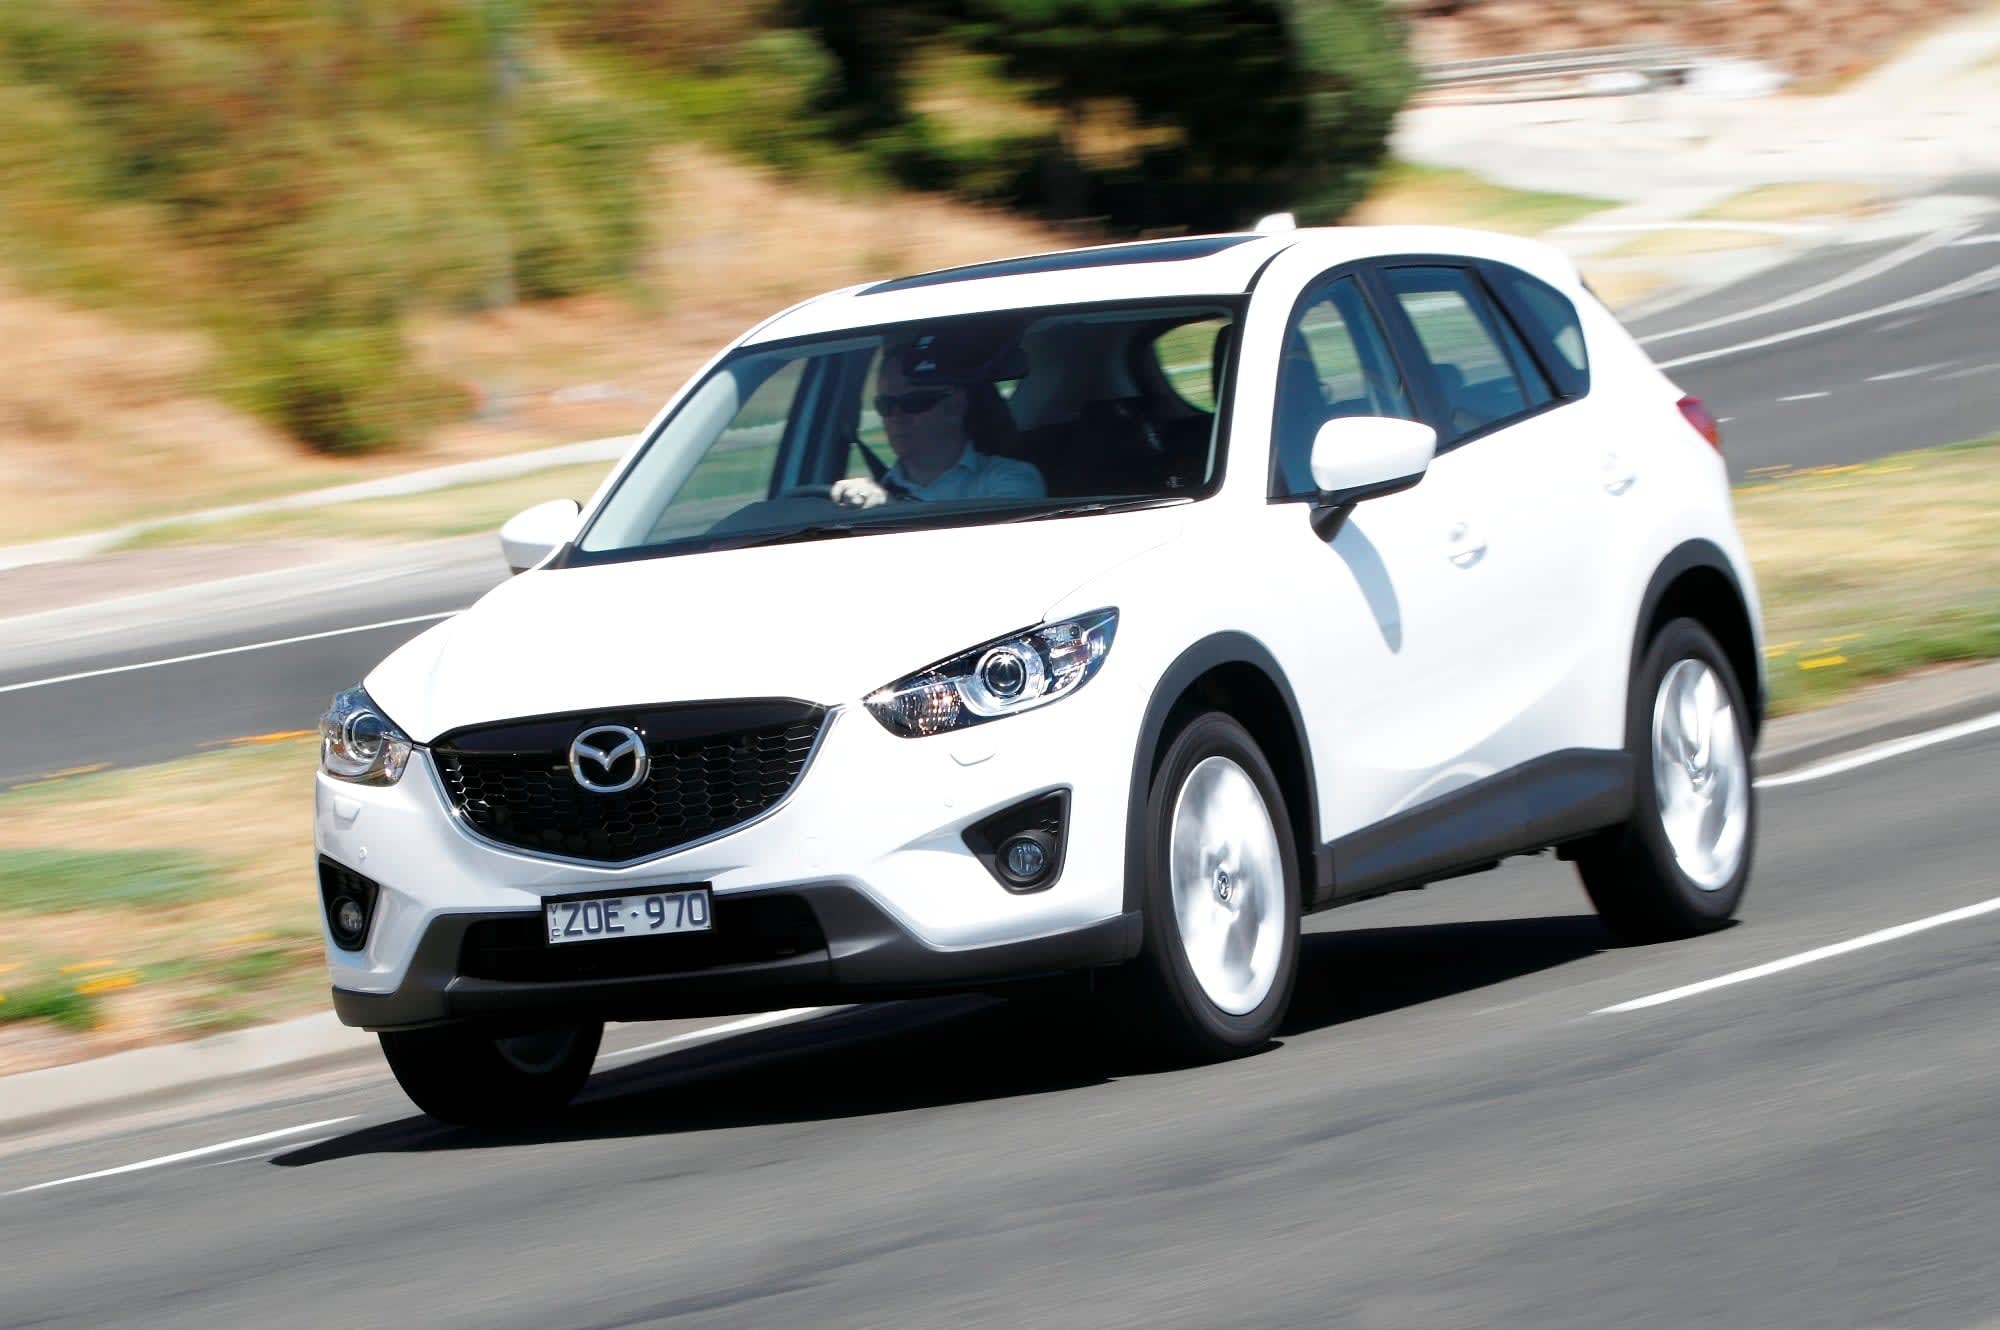 2013 Mazda CX-5: Is It Perfect? Not So Fast. - Reviewed